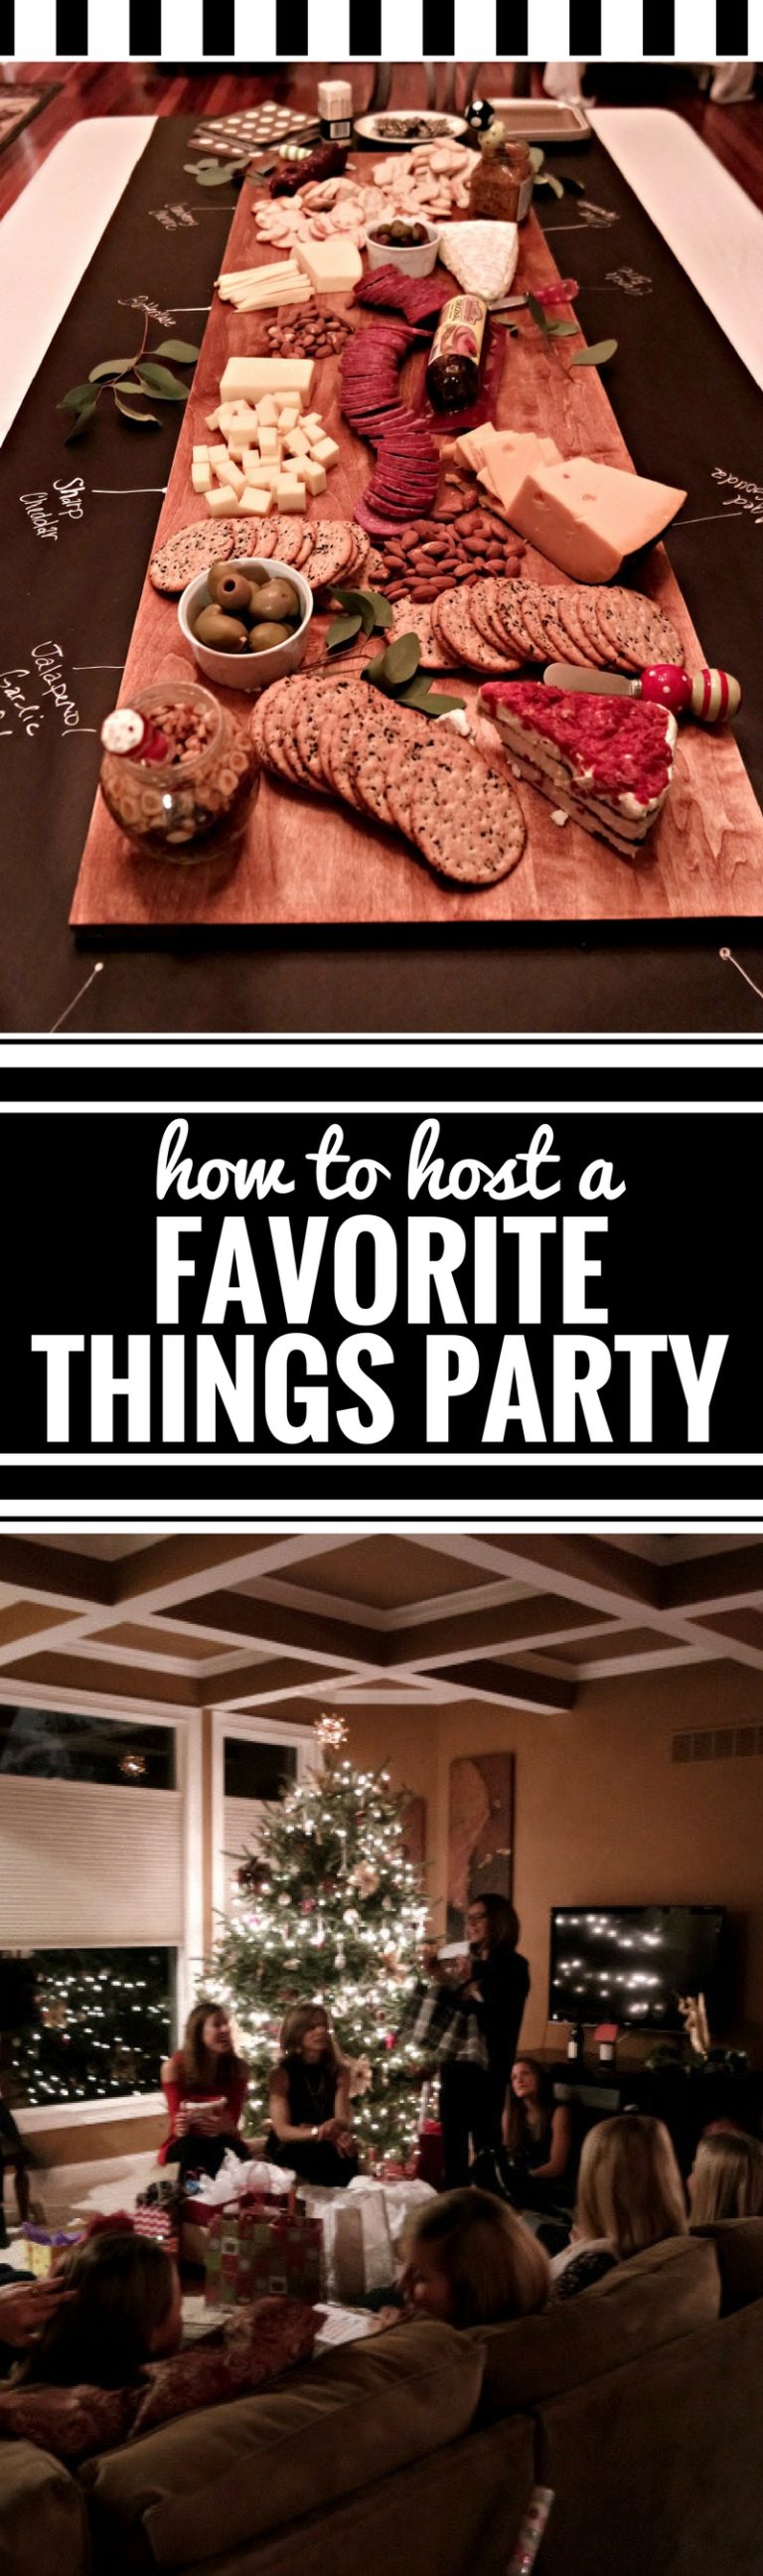 How to Host a Favorite Things Party